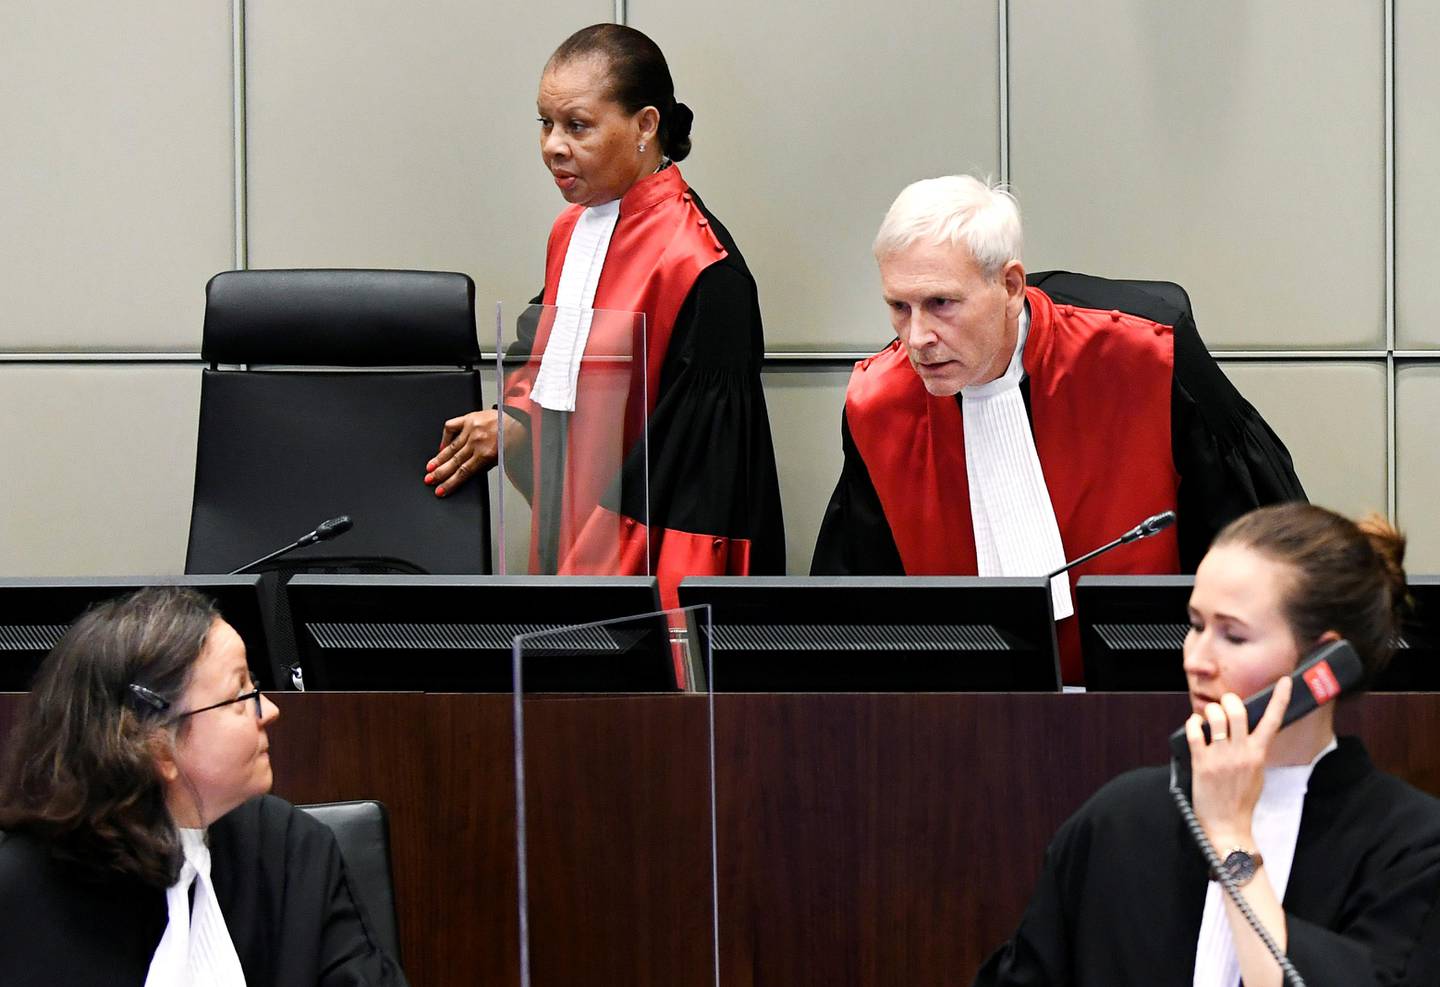 Judge David Re, Presiding Judge, and Judge Janet Nosworthy attend a session of the United Nations-backed Lebanon Tribunal handing down a judgement in the case of four men being tried in absentia for the 2005 bombing that killed former Prime Minister Rafik al-Hariri and 21 other people, in Leidschendam, Netherlands August 18, 2020.  REUTERS/Piroschka Van De Wouw/Pool